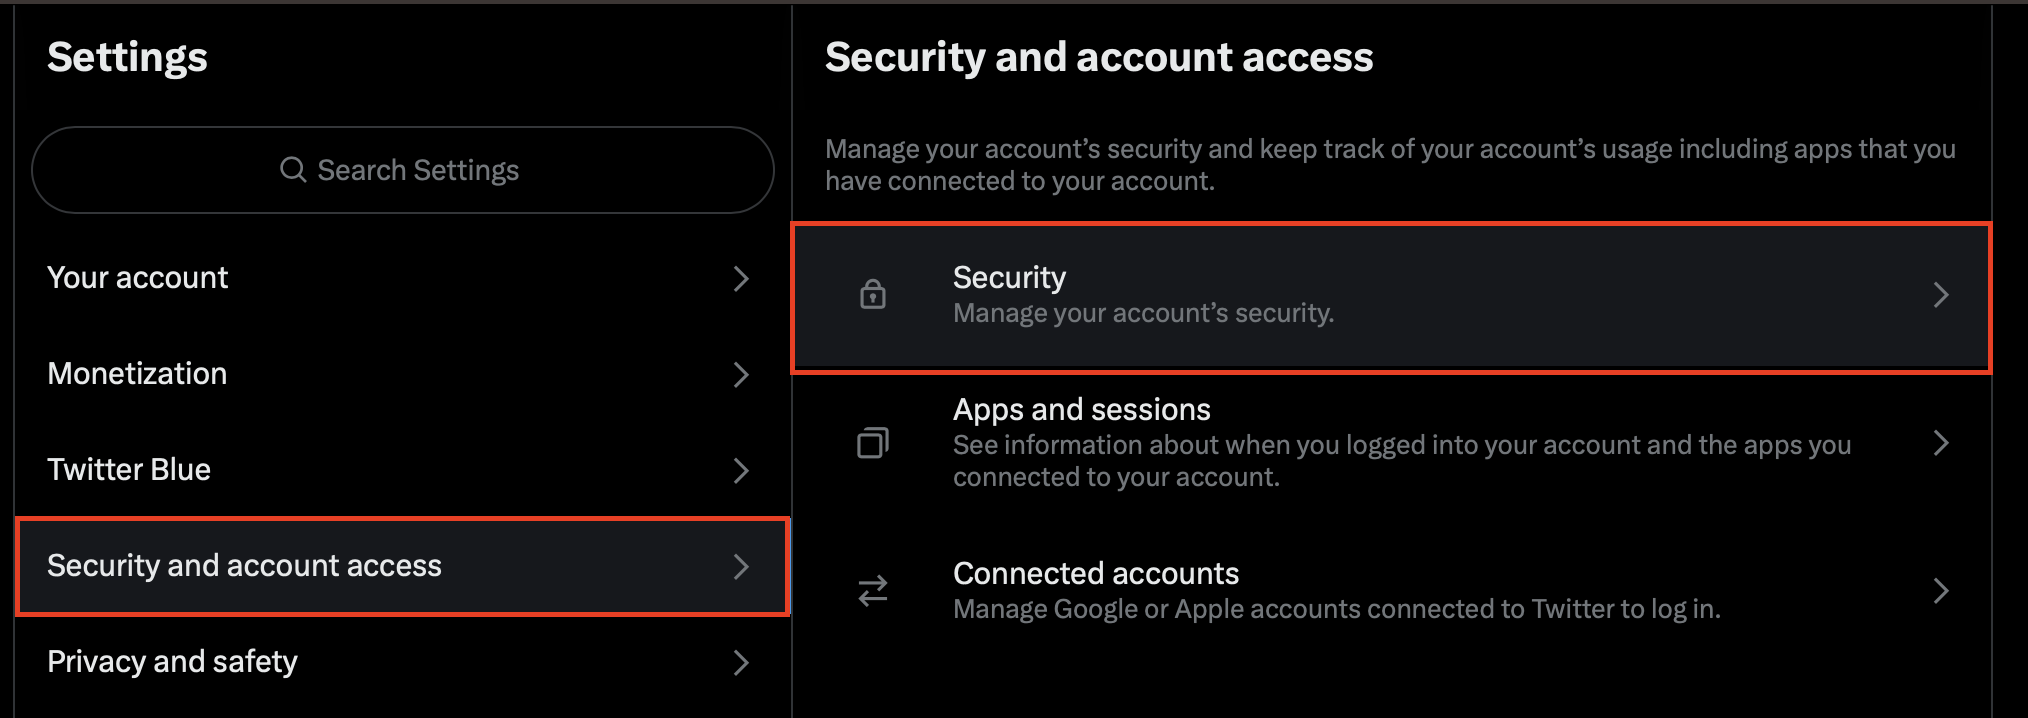 On the Settings page, select "Security and account access" on the left, then select "Security" on the right.